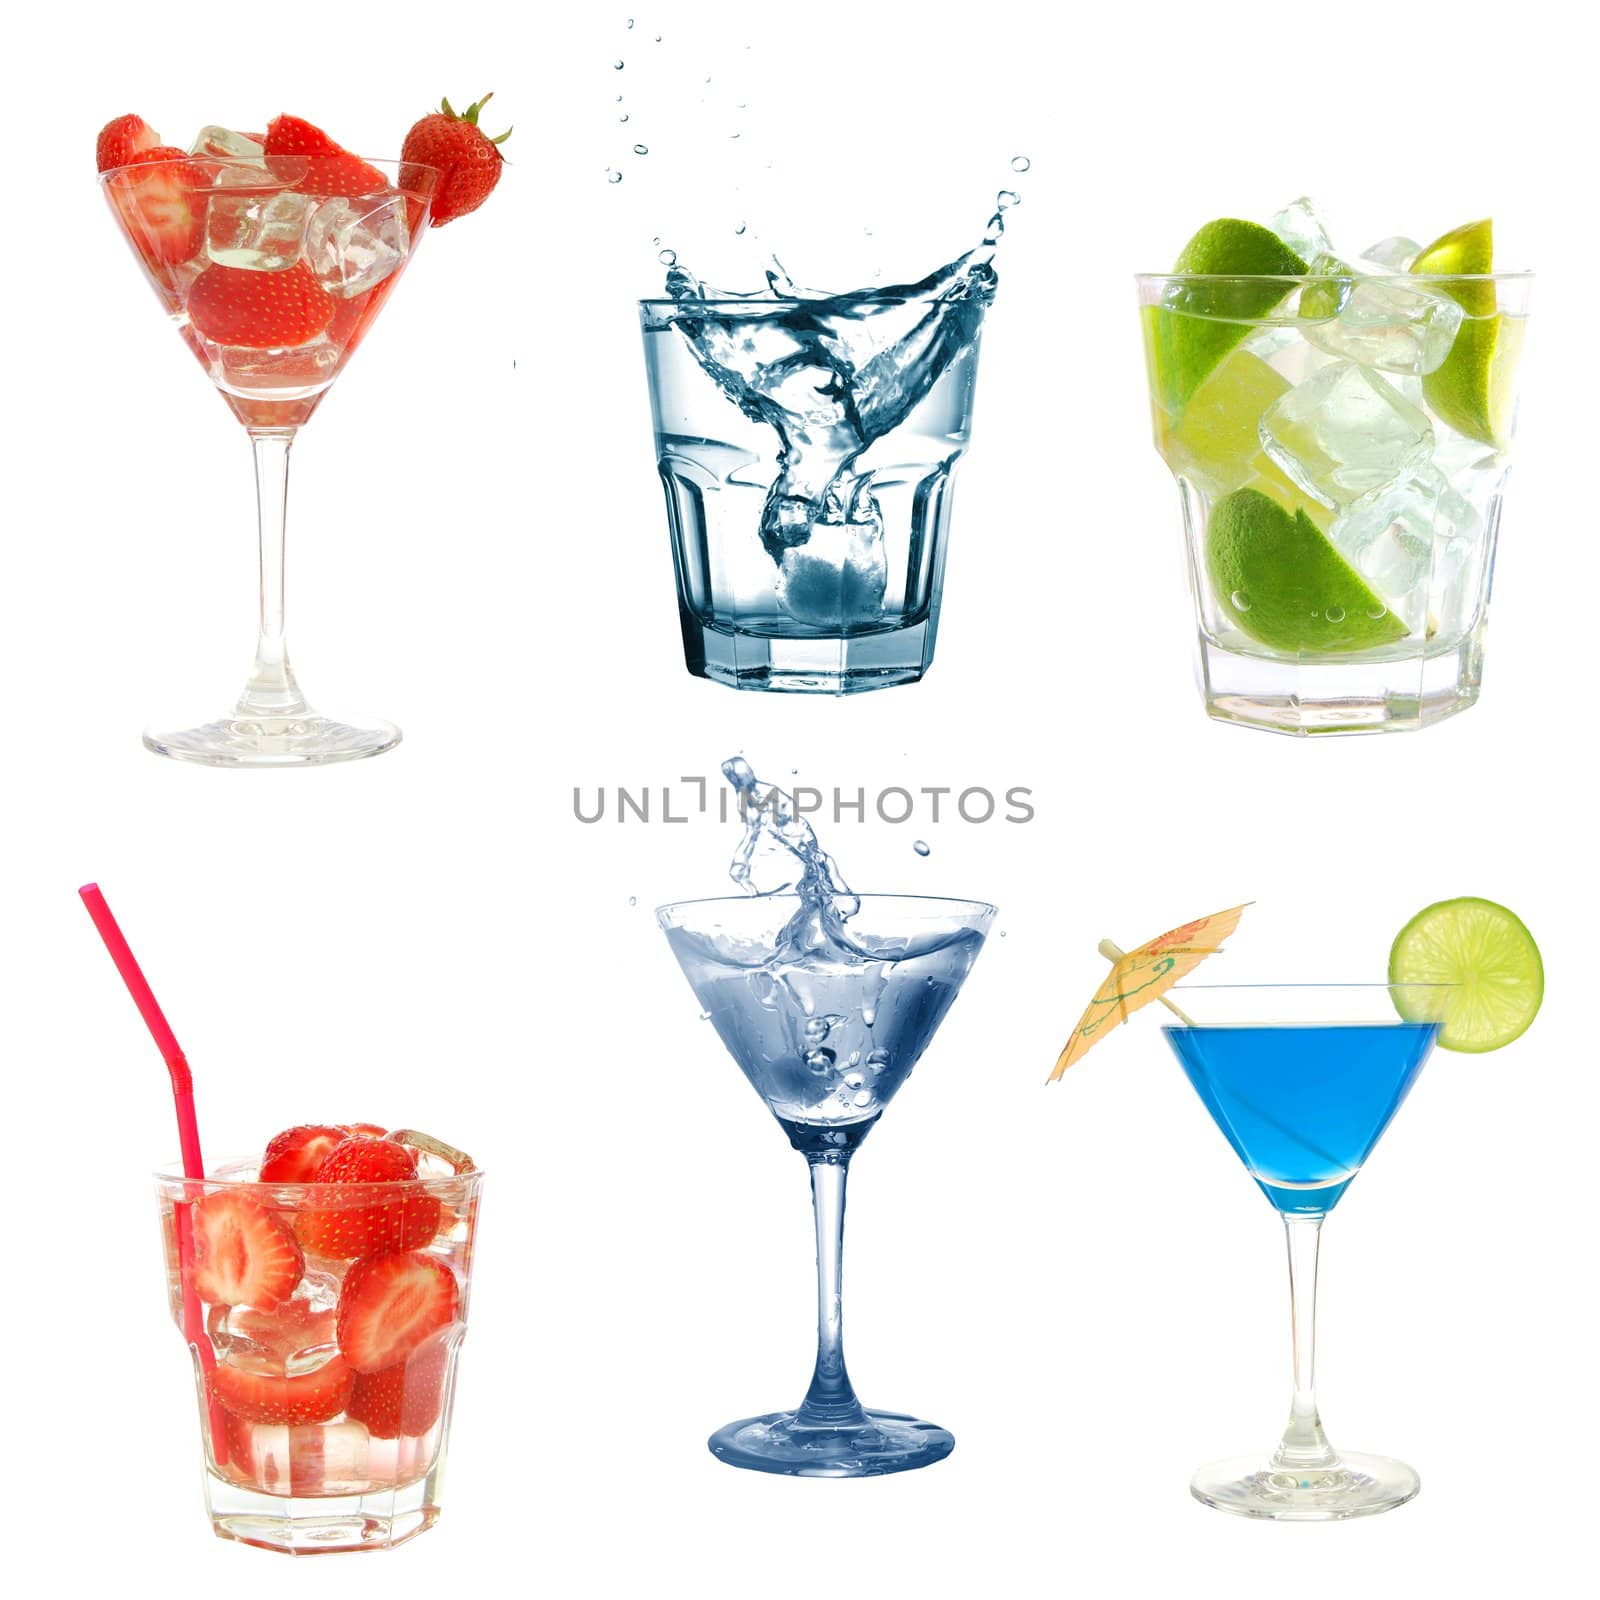 drink or cocktail collection isolated on a white background